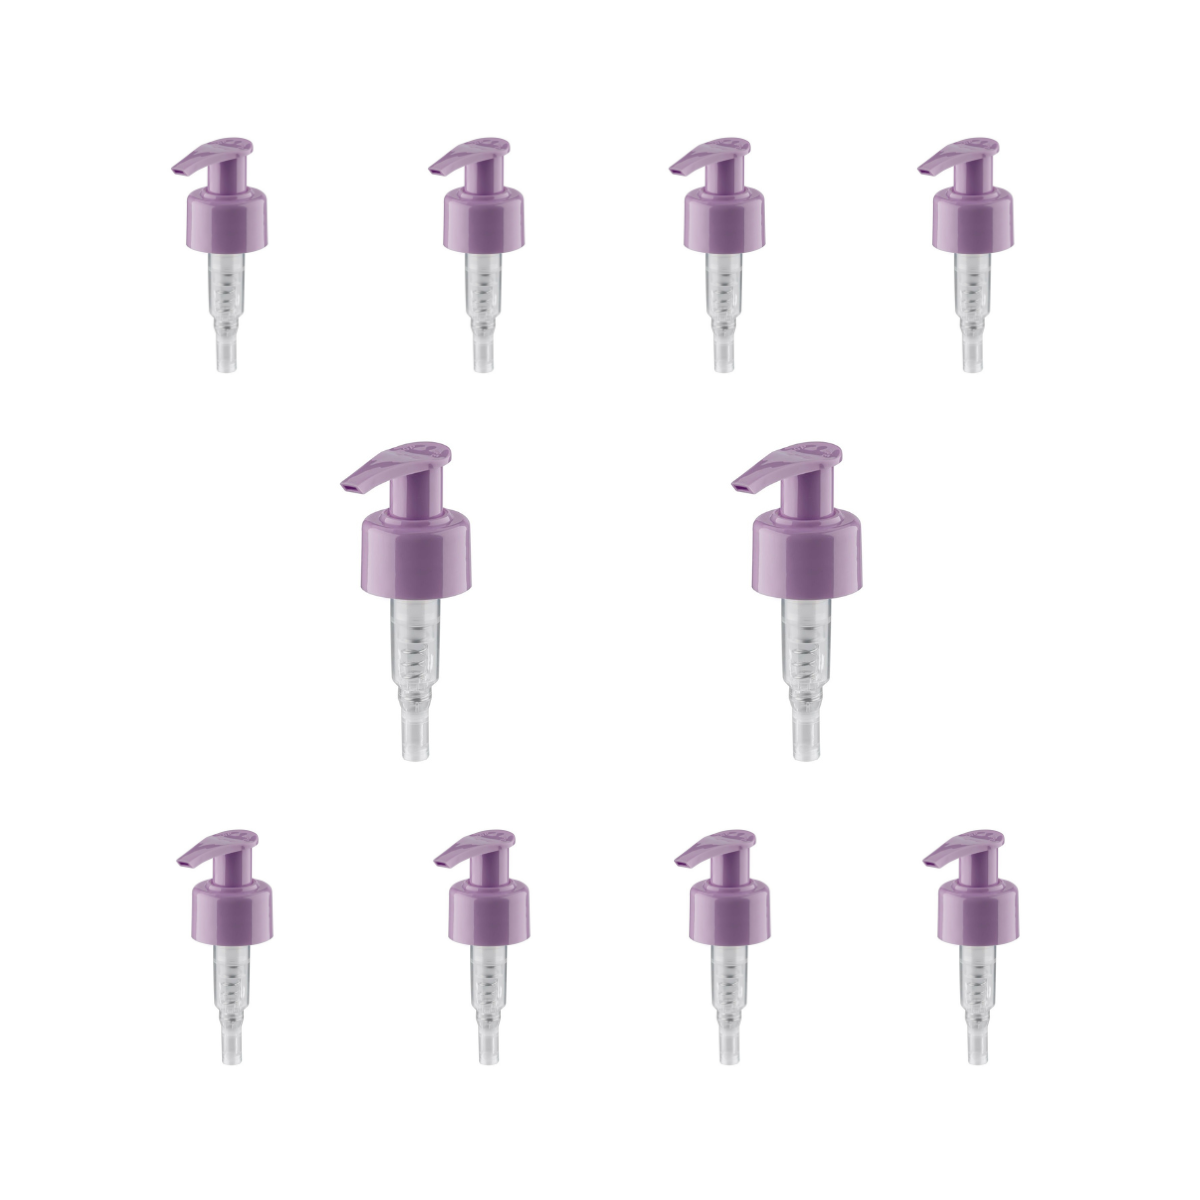 Dompel Pump valves, color lilac, thread 28/410, made with stainless steel springs and glass balls, Model 303-A1. (Pump heads only, bottles not included) - depilcompany